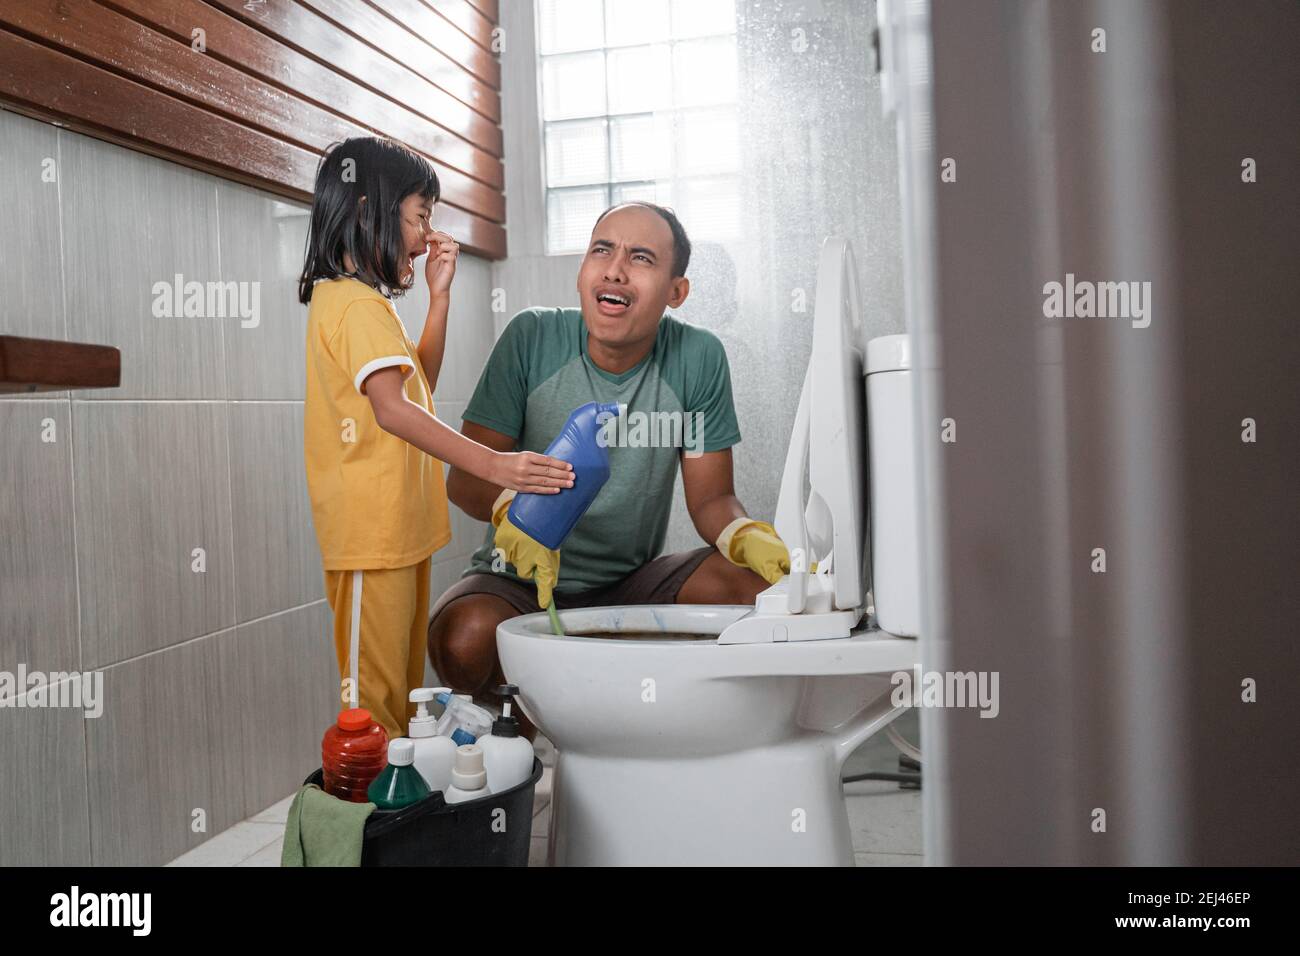 the little girl in a nasty pose holding a bottle of cleaning fluid chatting  with her dad while brushing the dirty toilet in the bathroom Stock Photo -  Alamy